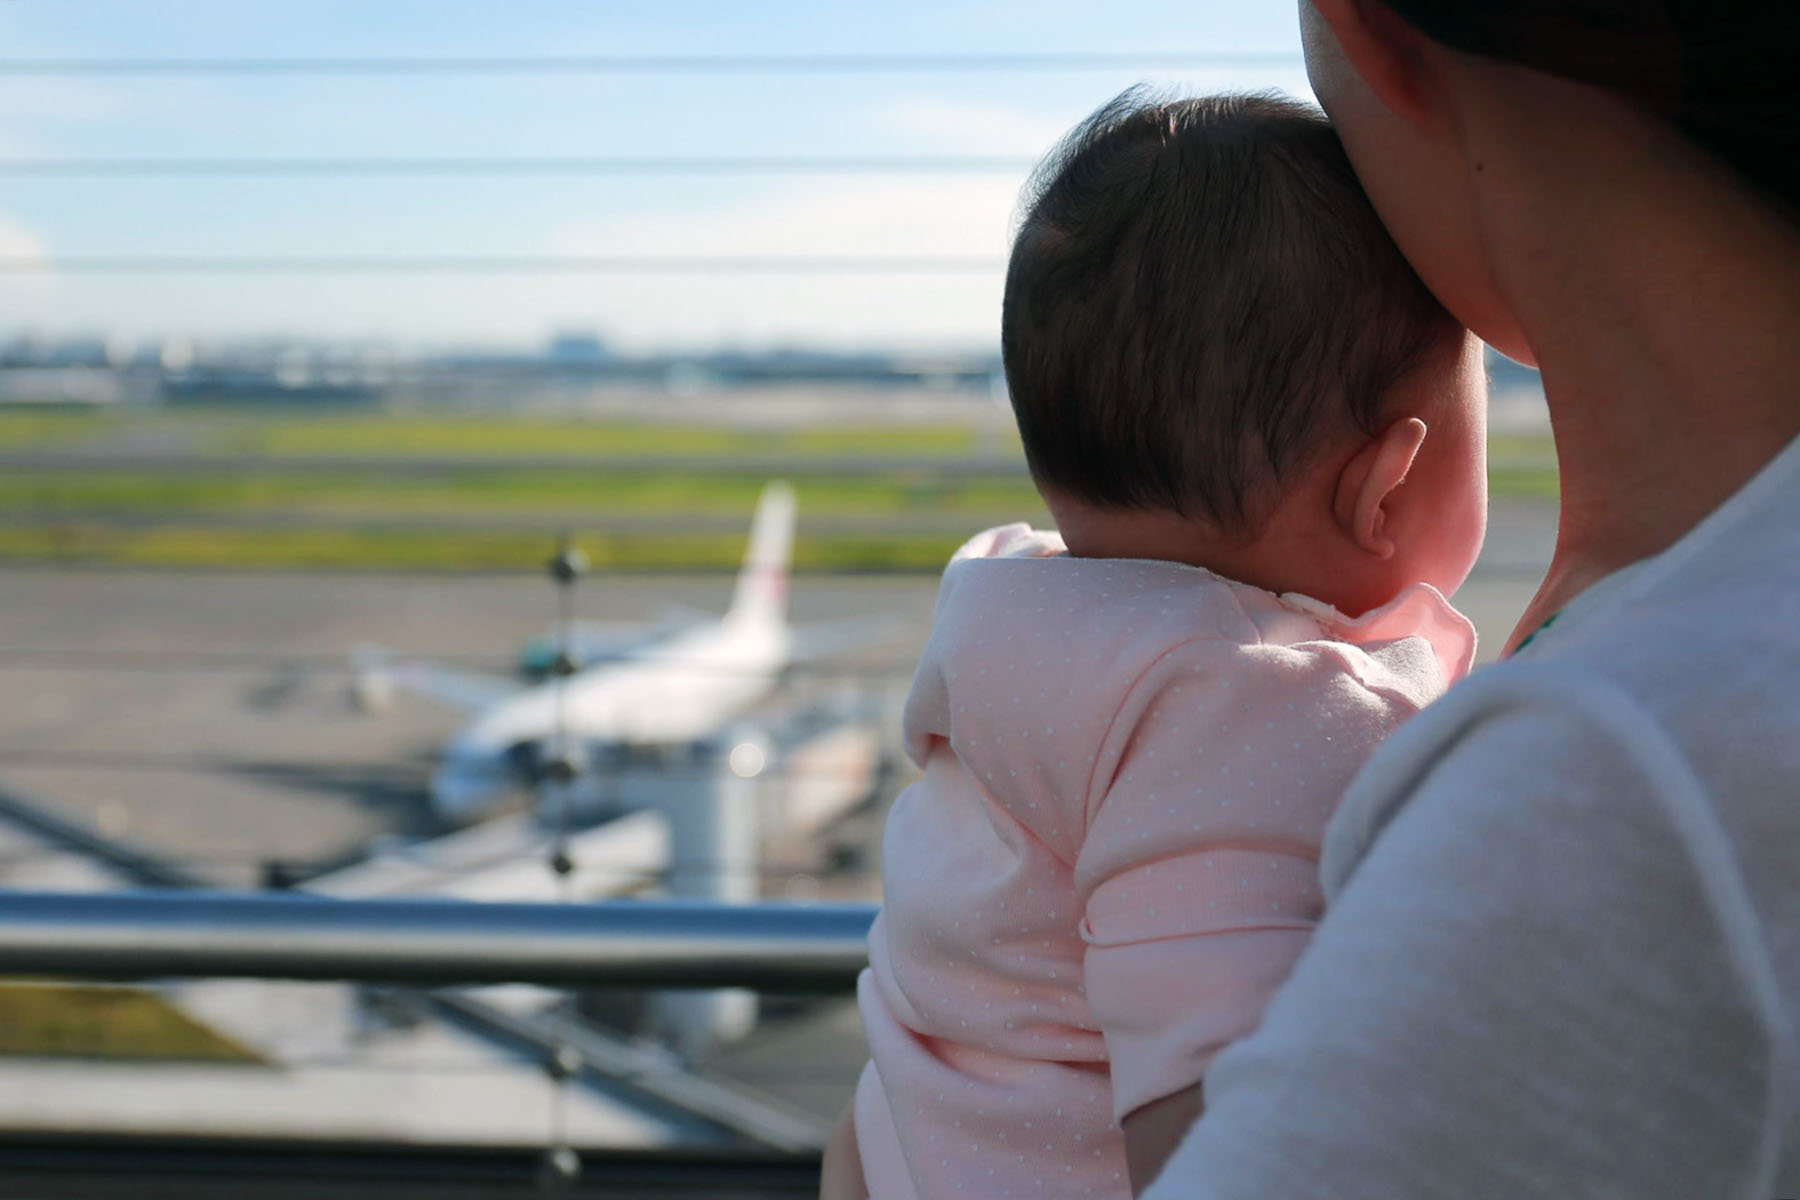 A mother holds her baby at the airport. In the background, the tarmac is seen through a window.